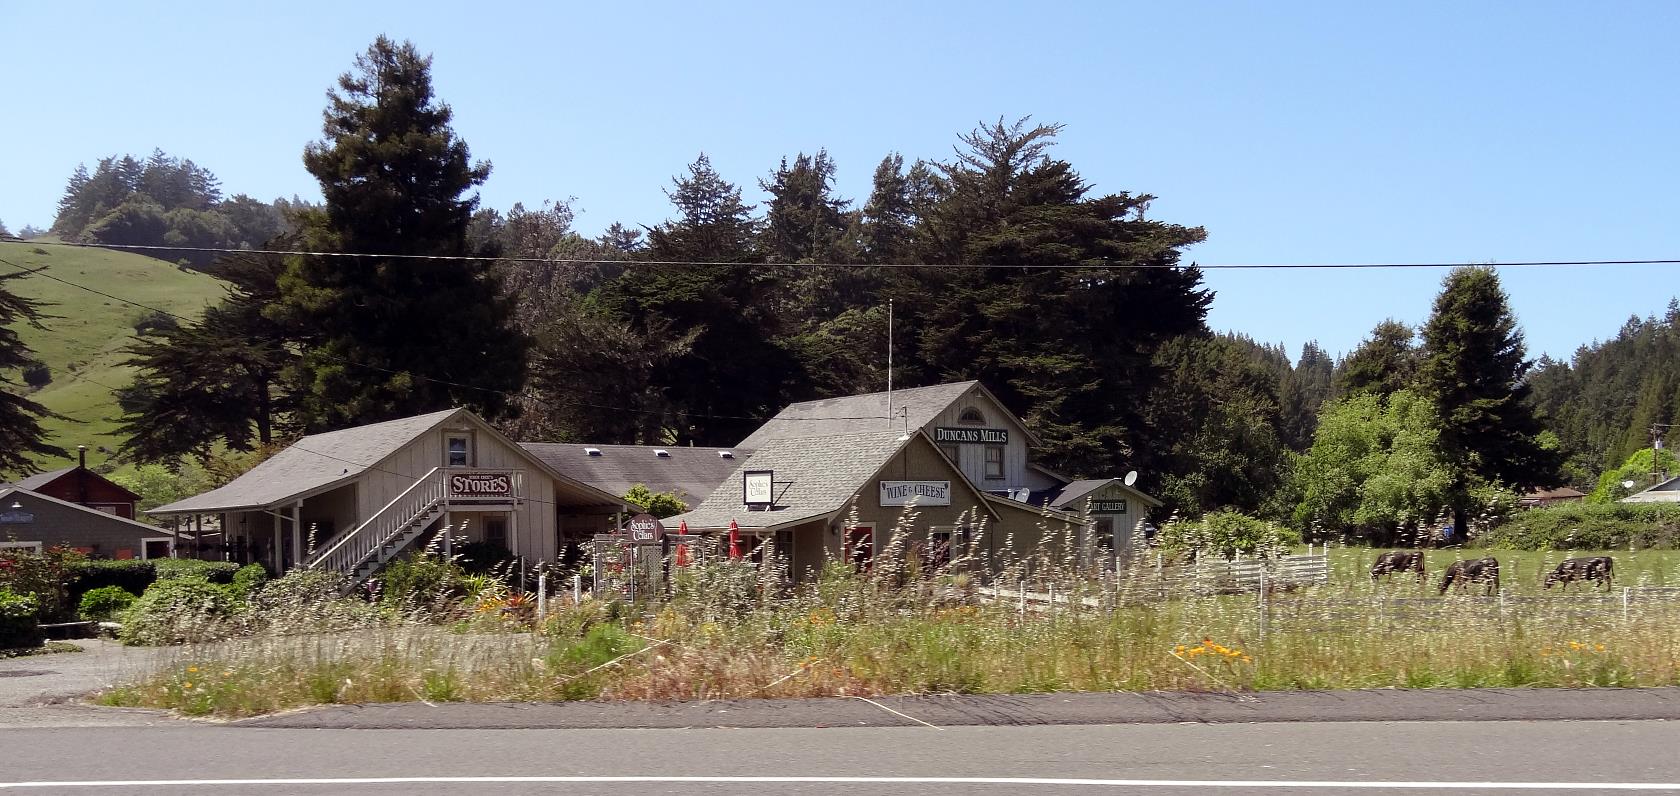 I passed the small tourist stop of Dunkan's Mills as I headed back to along the Russian River to class=